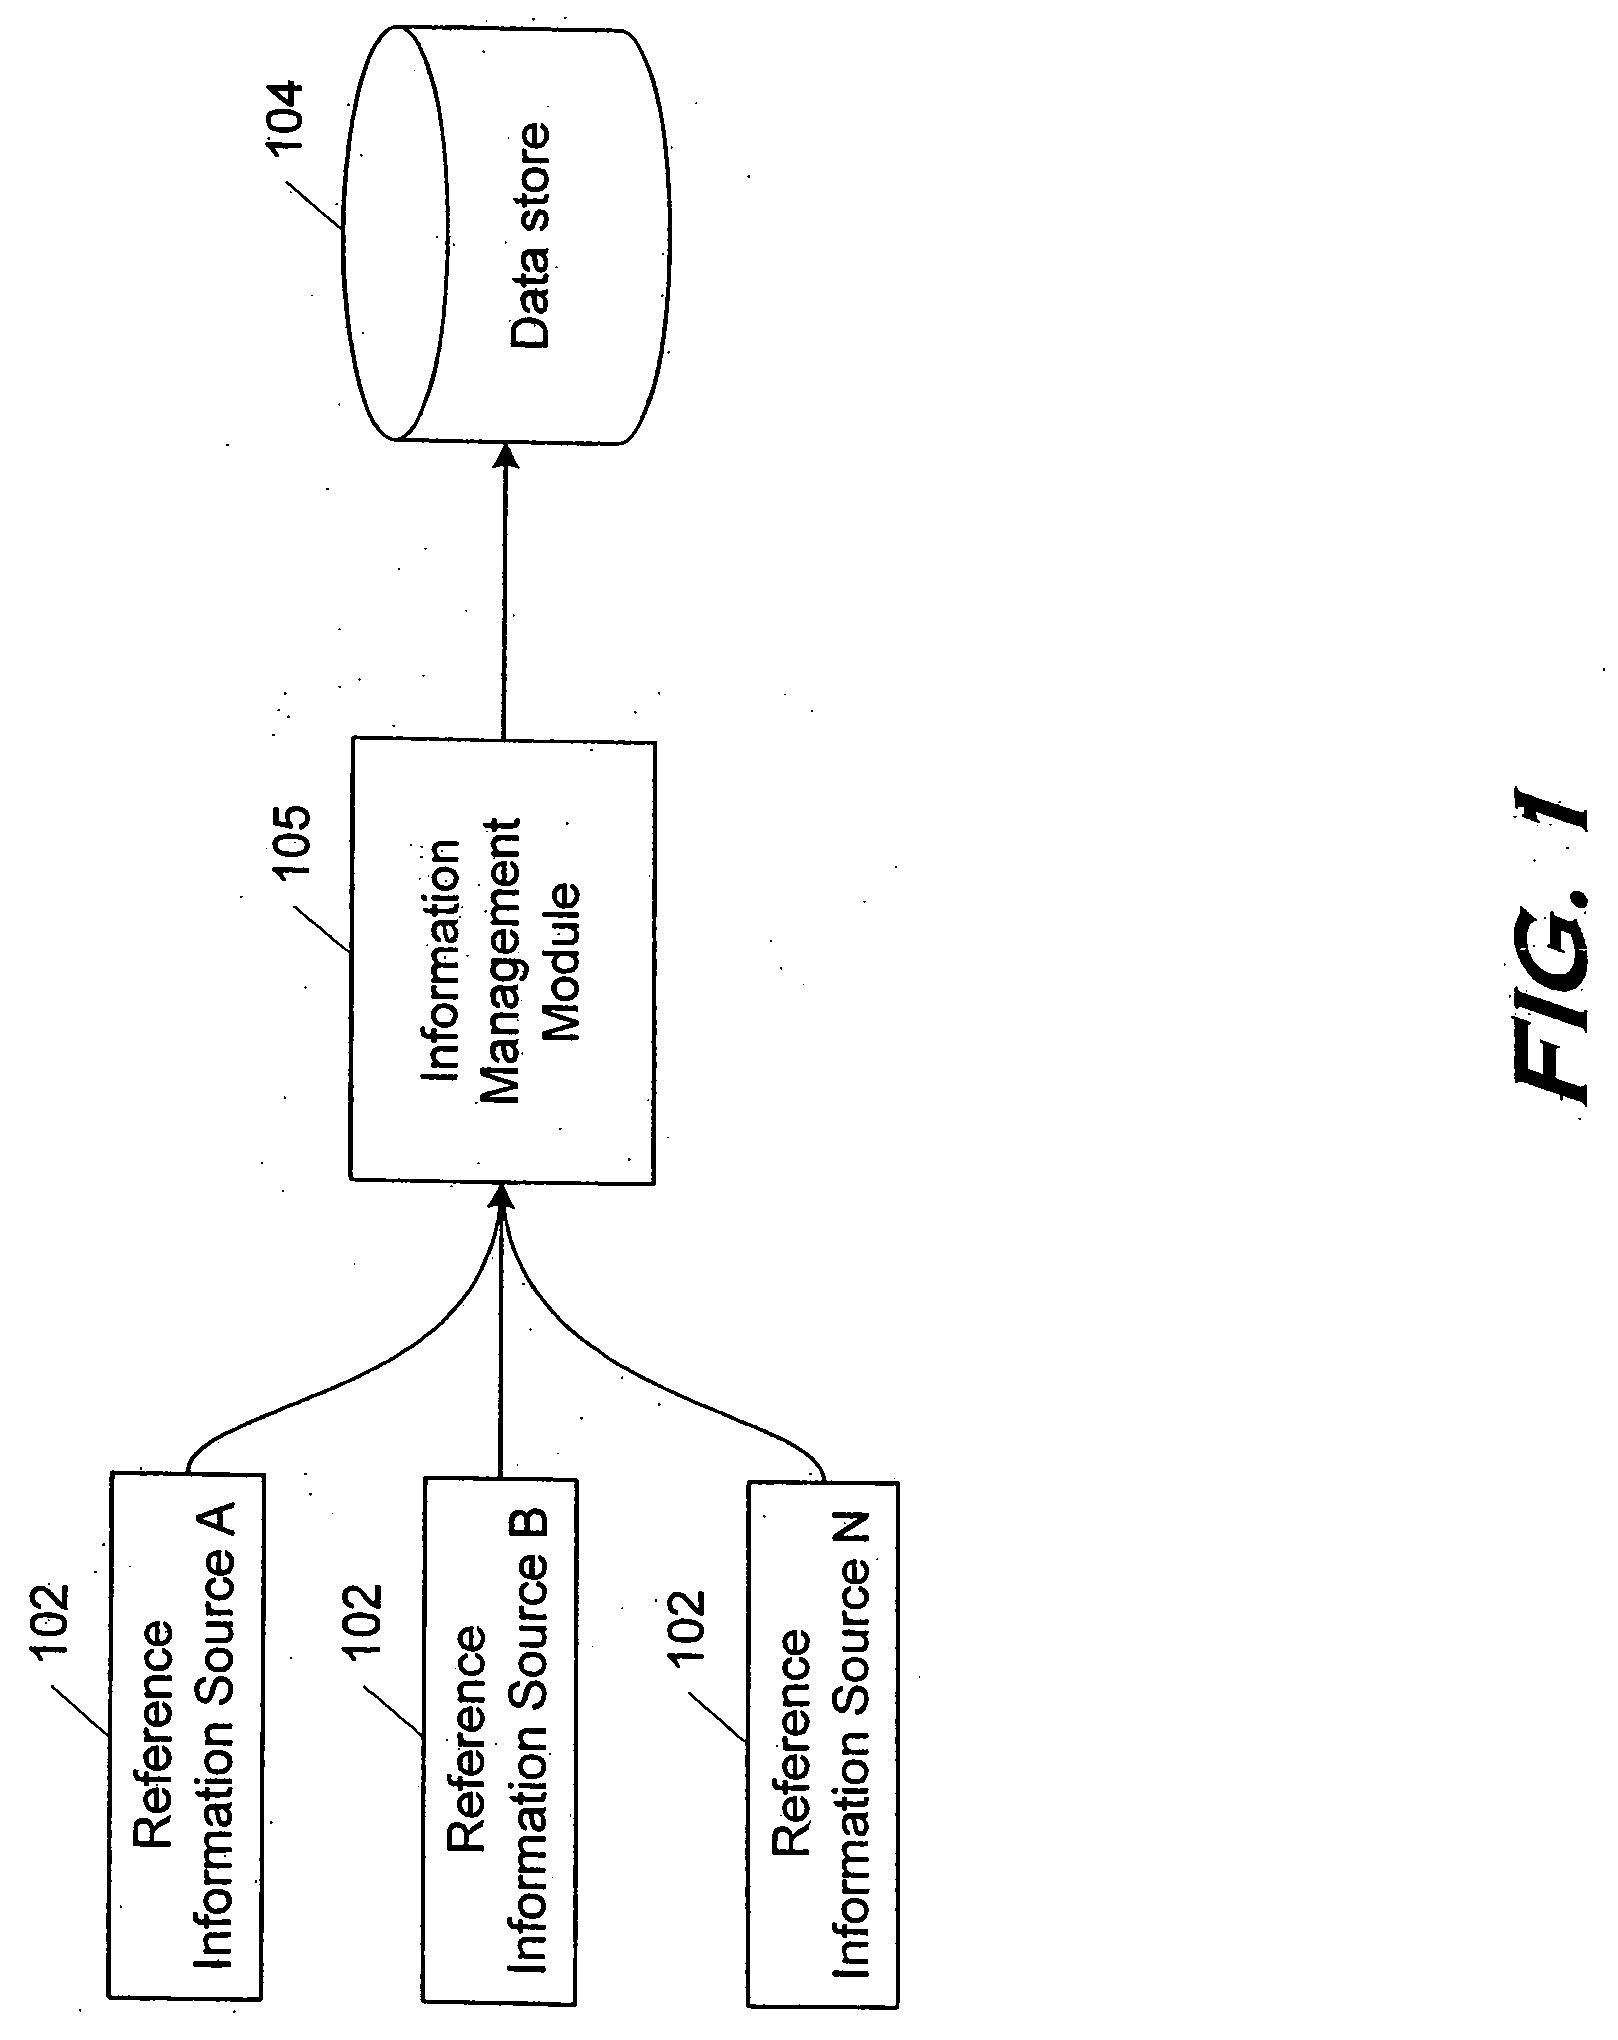 User interface for display of task specific information